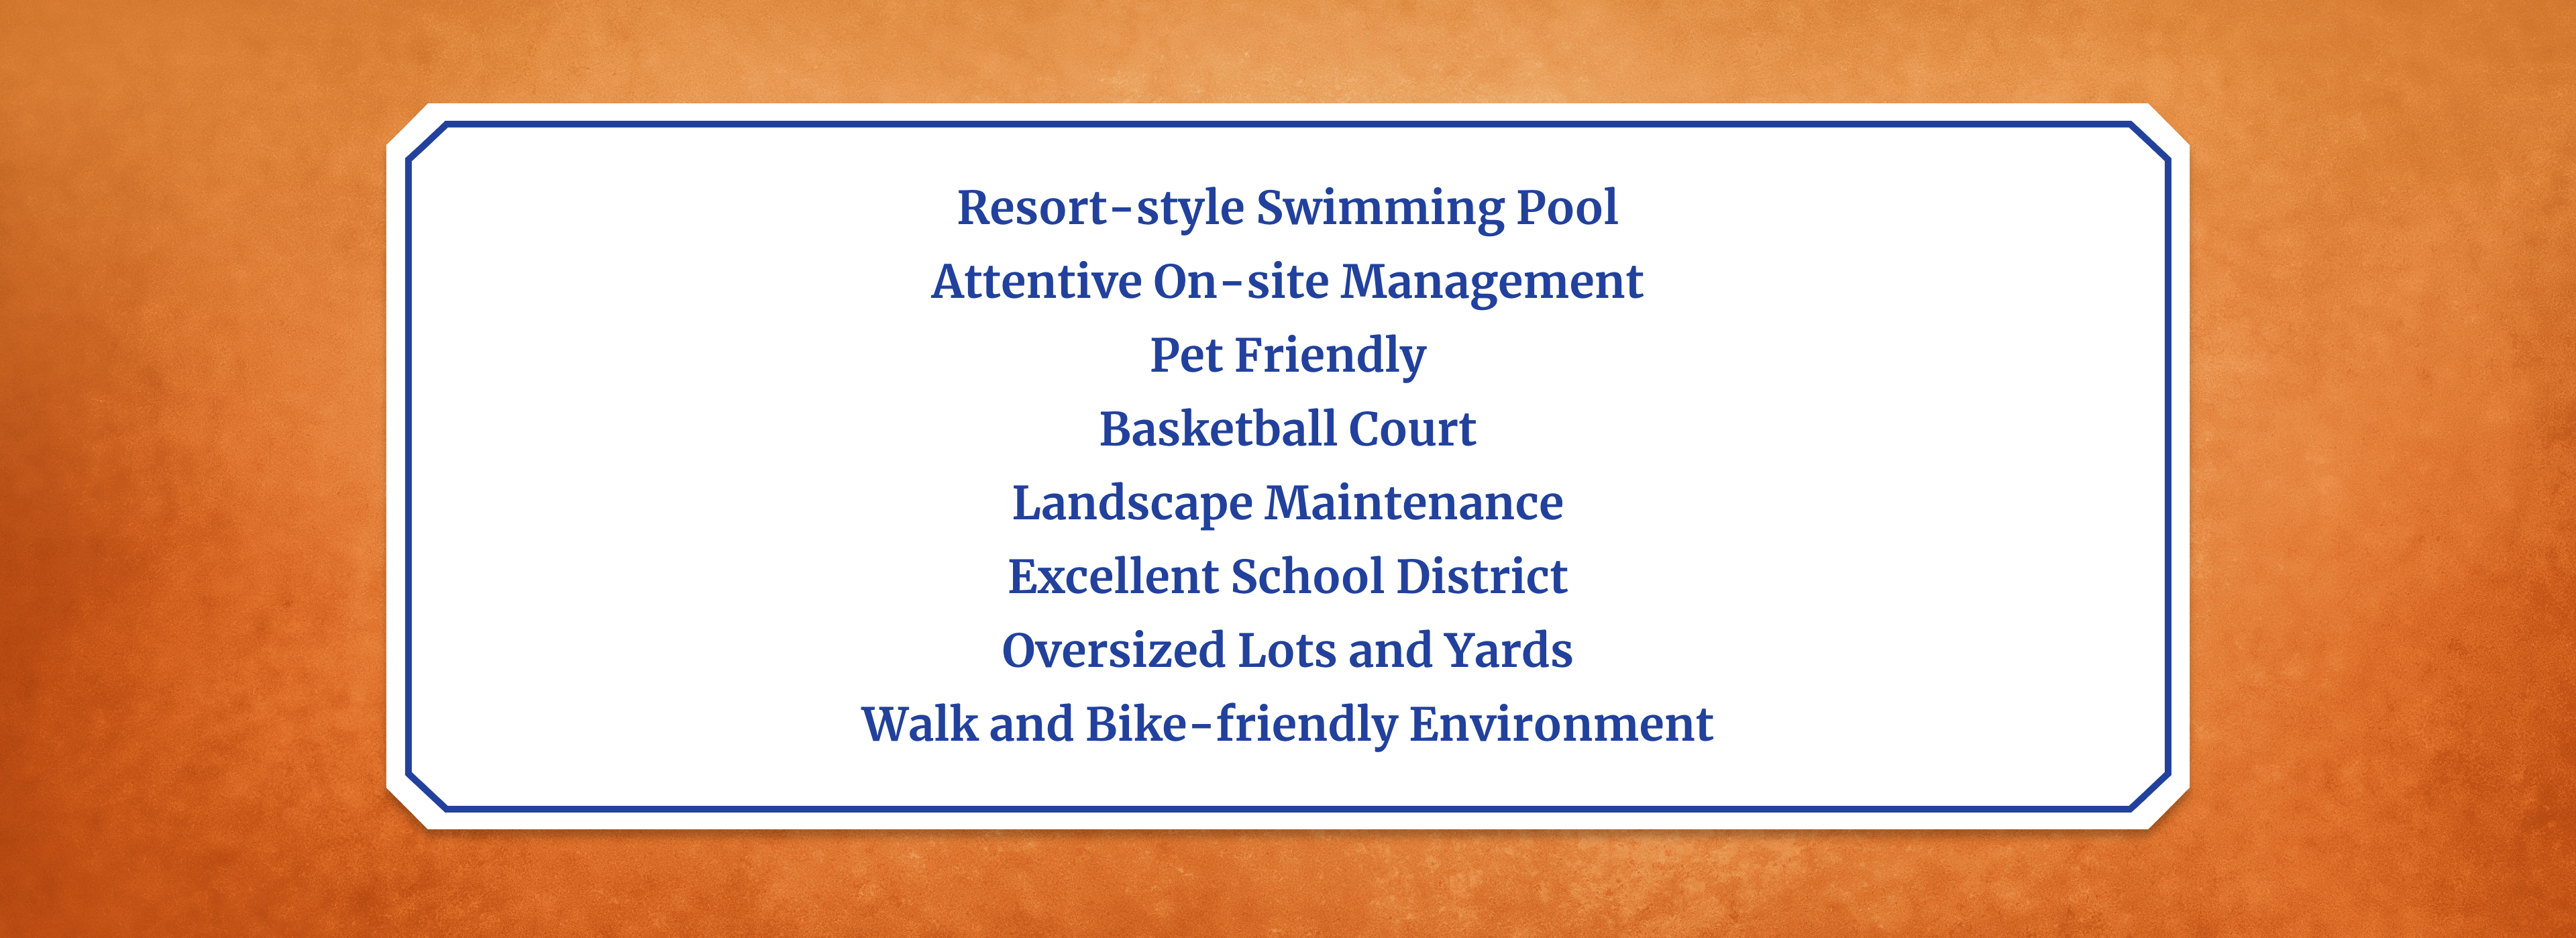 Resort-style Swimming Pool     Attentive On-site Management     Pet Friendly     Basketball Court     Landscape Maintenance     Excellent School District     Oversized Lots and Yards     Walk and Bike-friendly Environment